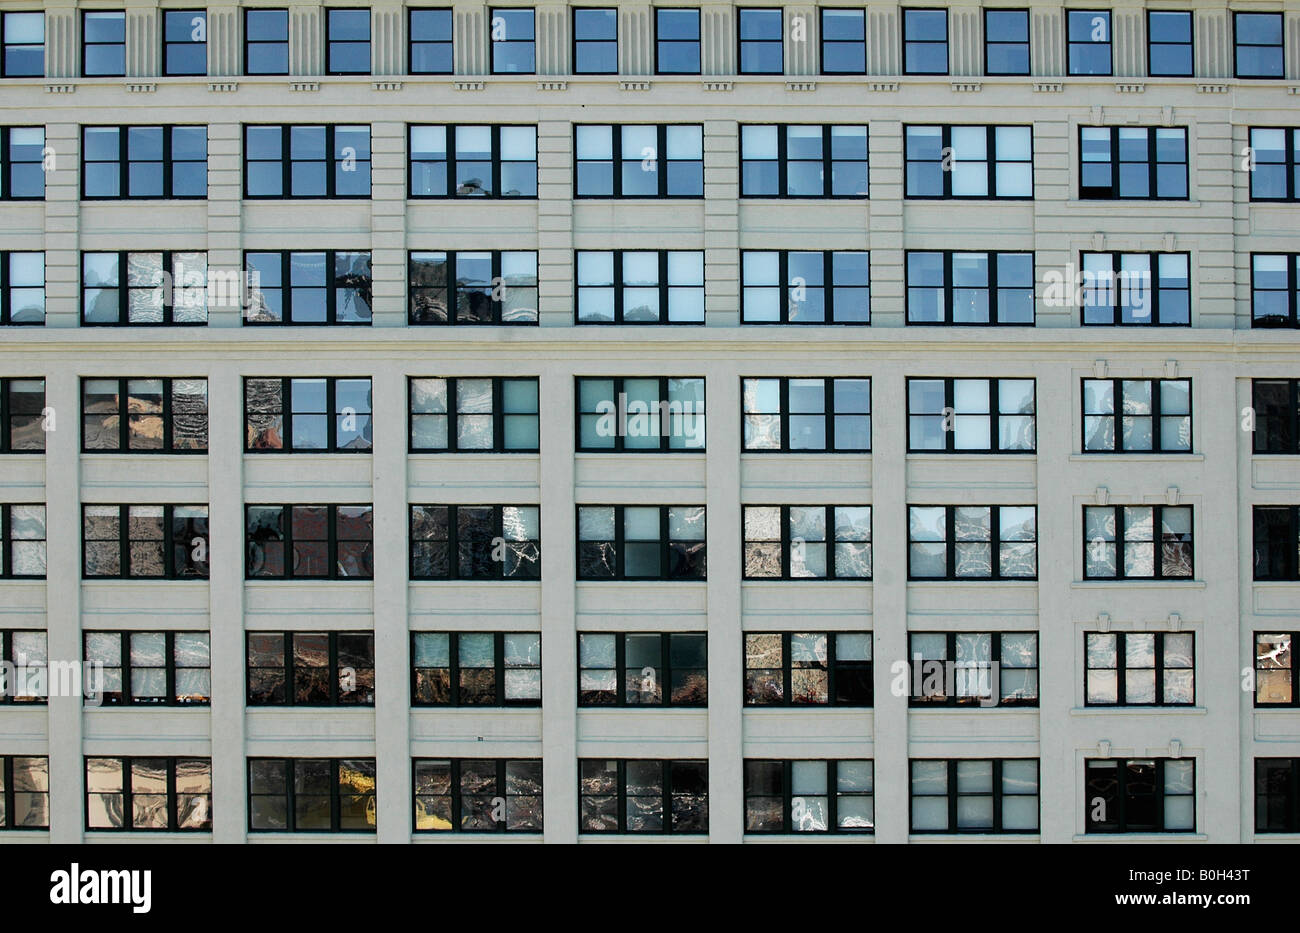 rows of square office building windows filling the frame in a symmetrical  image Stock Photo - Alamy